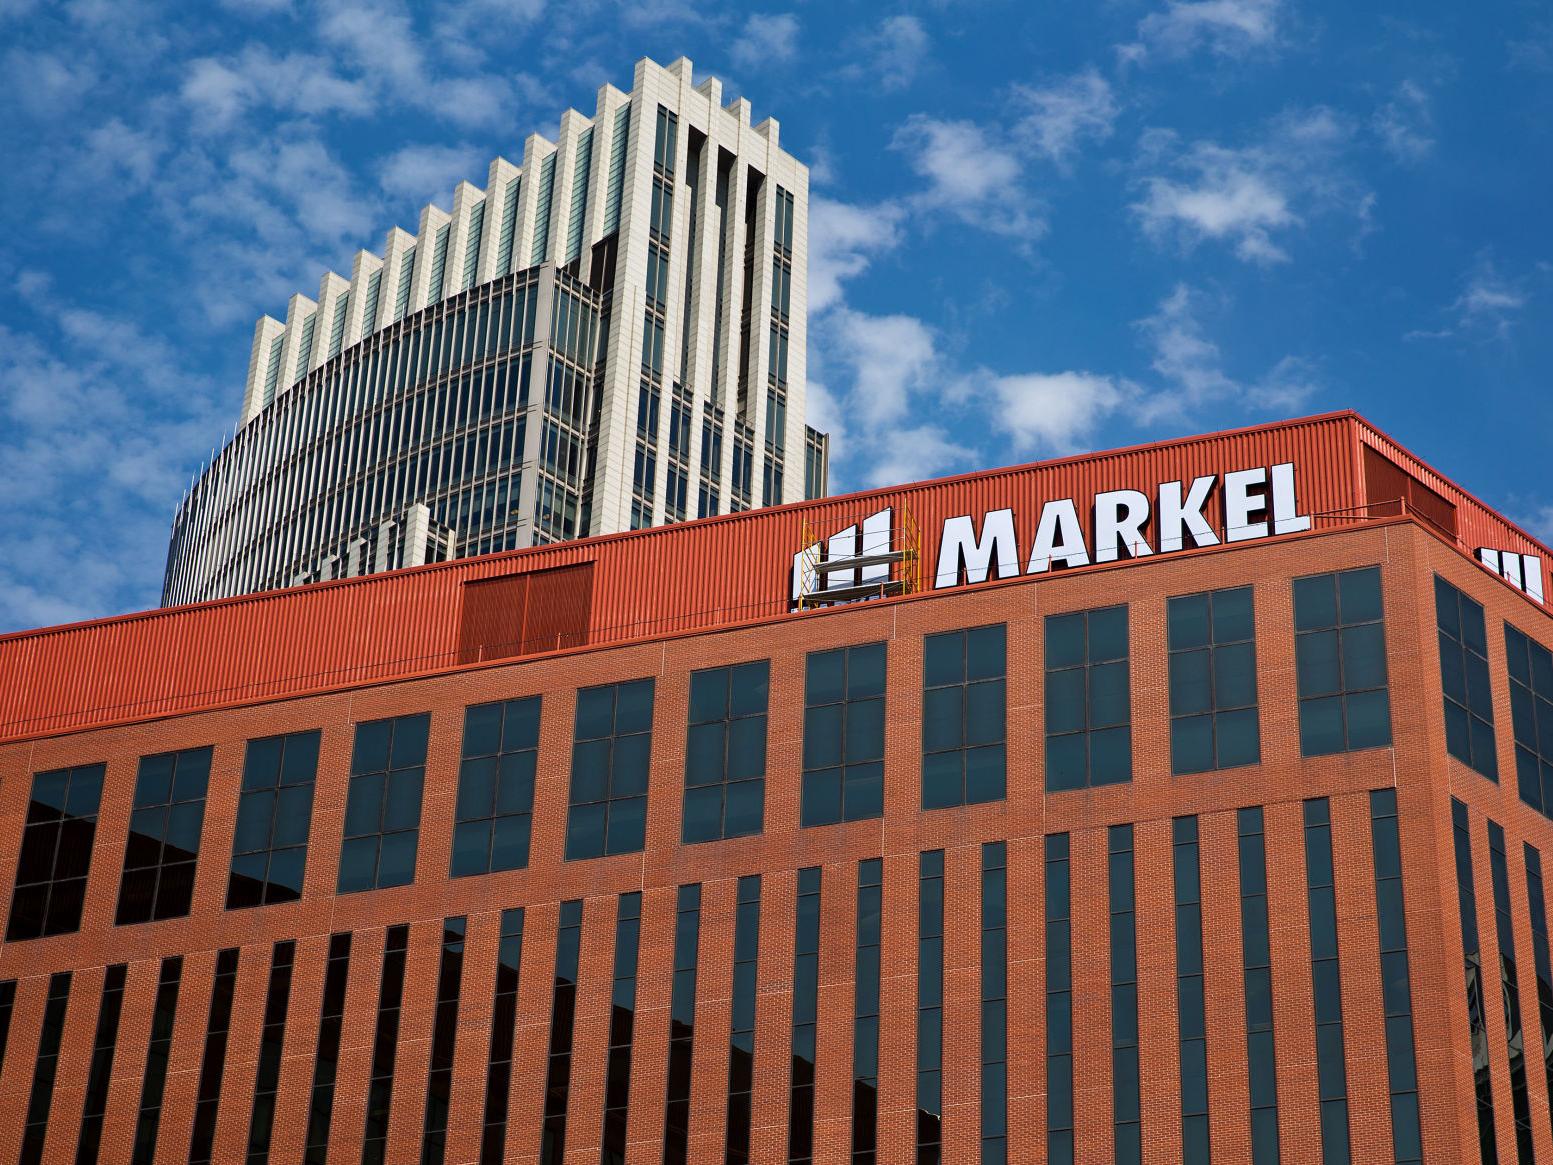 A view of Markel Insurance Company's headquarters